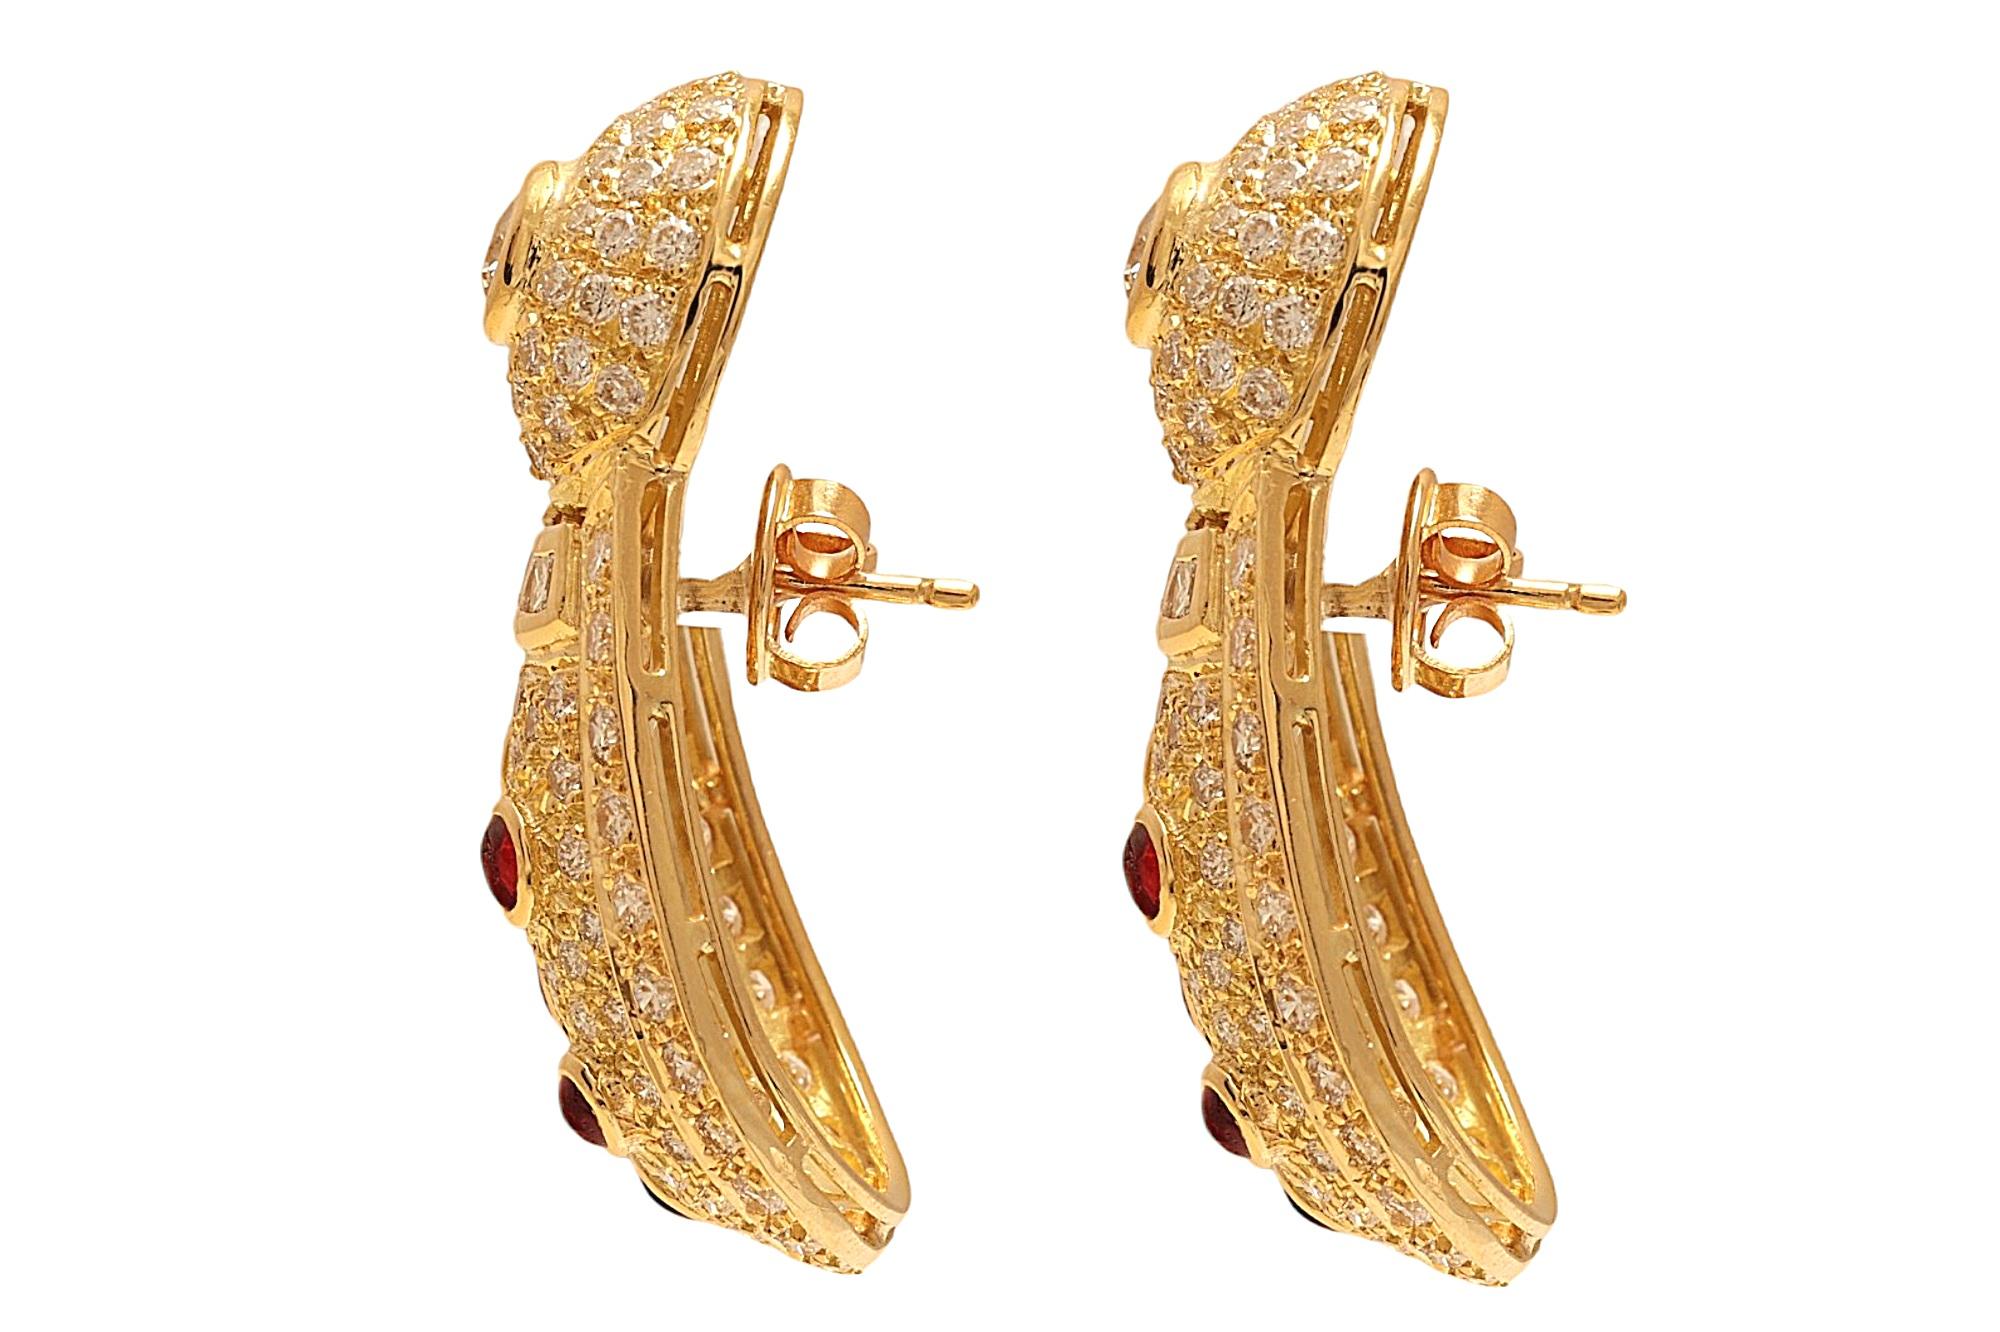 Brilliant Cut 18 kt. Yellow Gold Earrings, Possibly Depicting a Lady Bird with Diamonds & Ruby For Sale